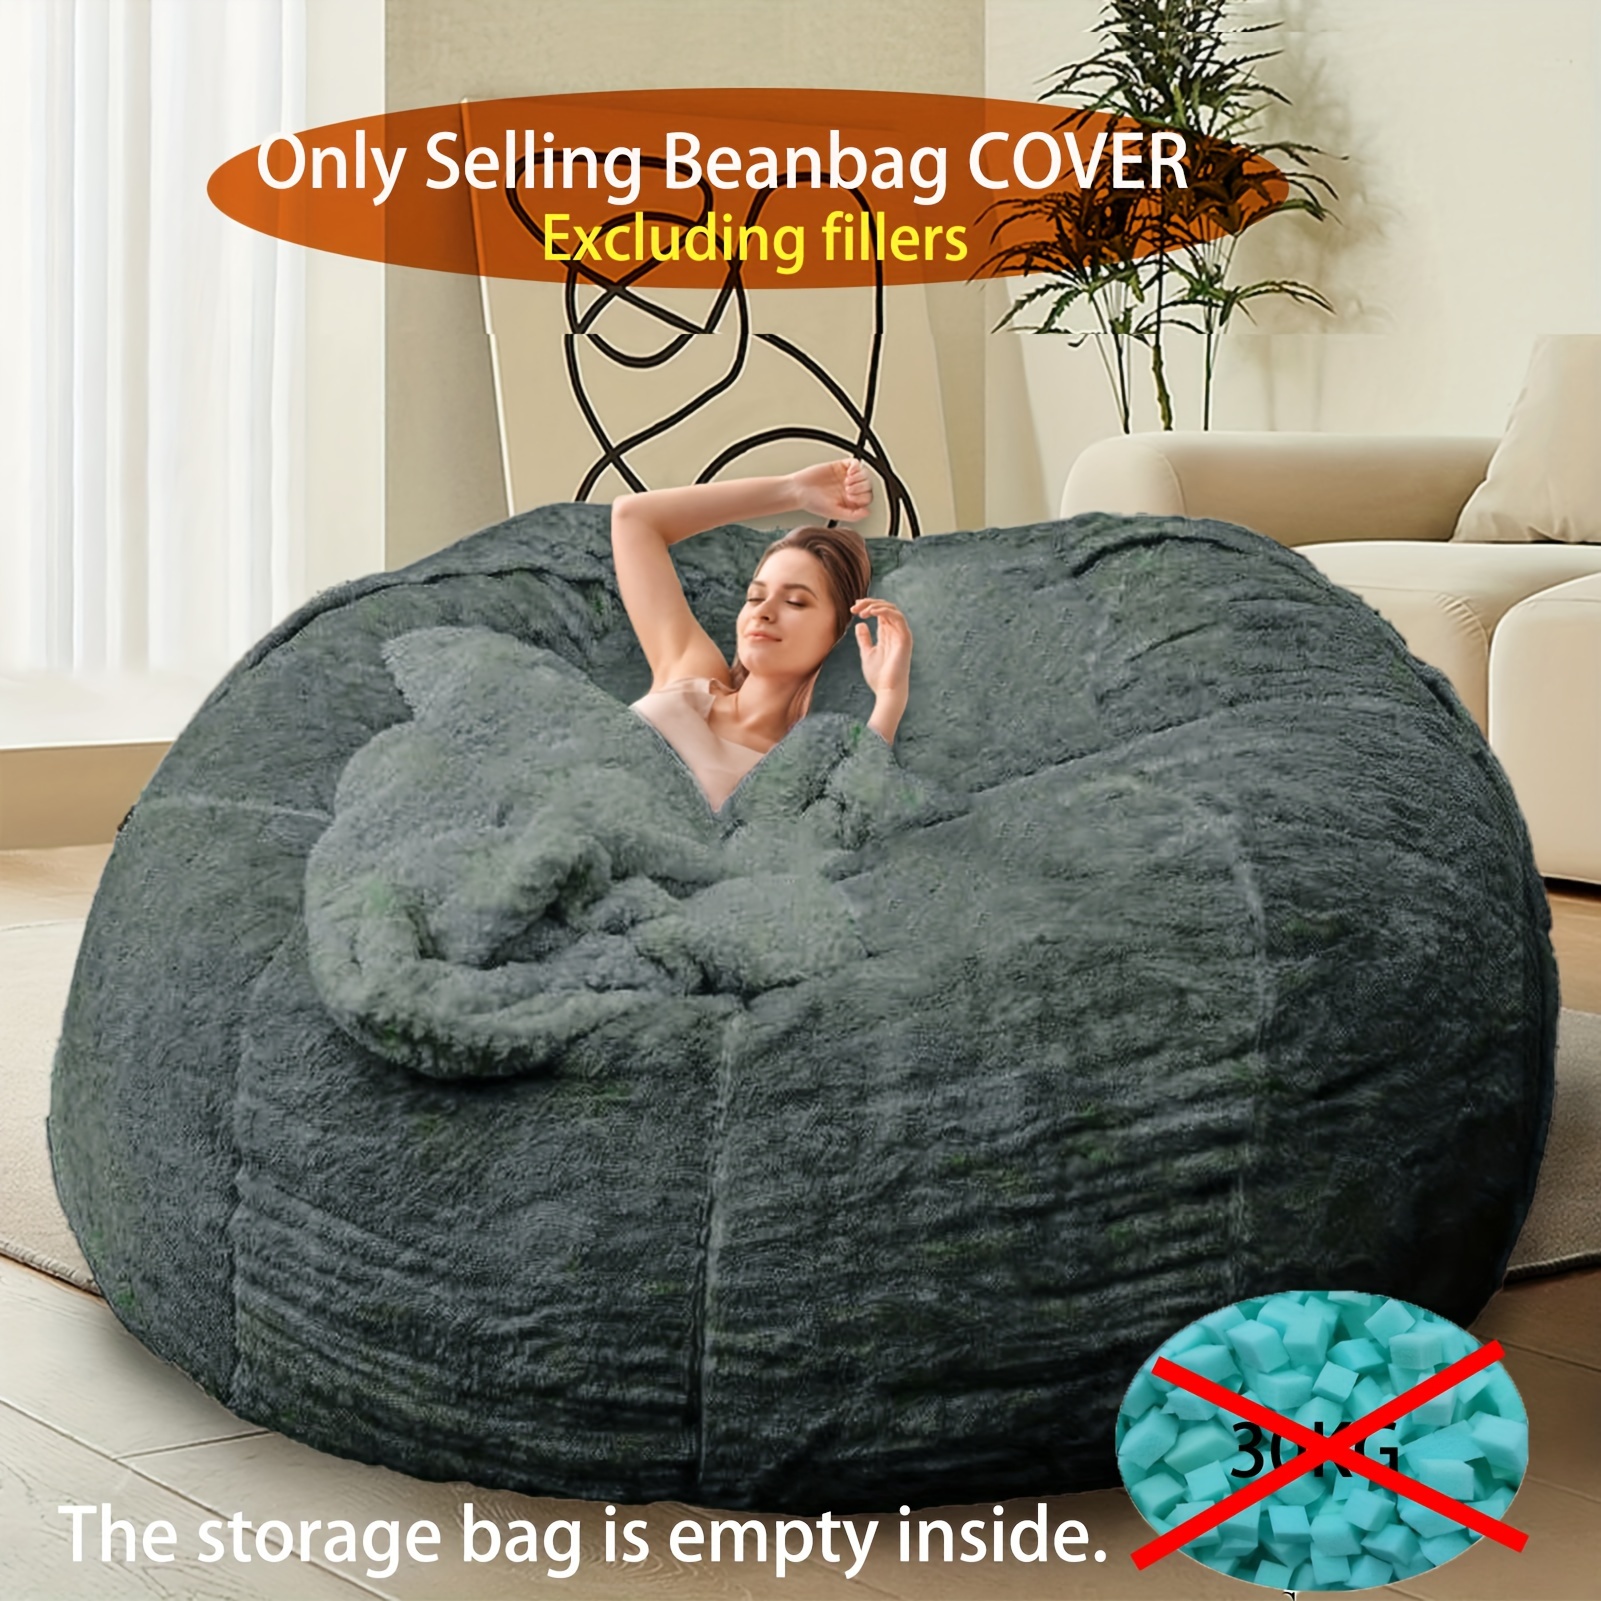  BOXIN Bean Bag Filler,5 LBS Shredded Memory Foam Filling for  Bean Bag Refill Pillow Dog Bed Chairs Ottoman Couch Cushion Stuffed Animals  Arts Crafts : Home & Kitchen